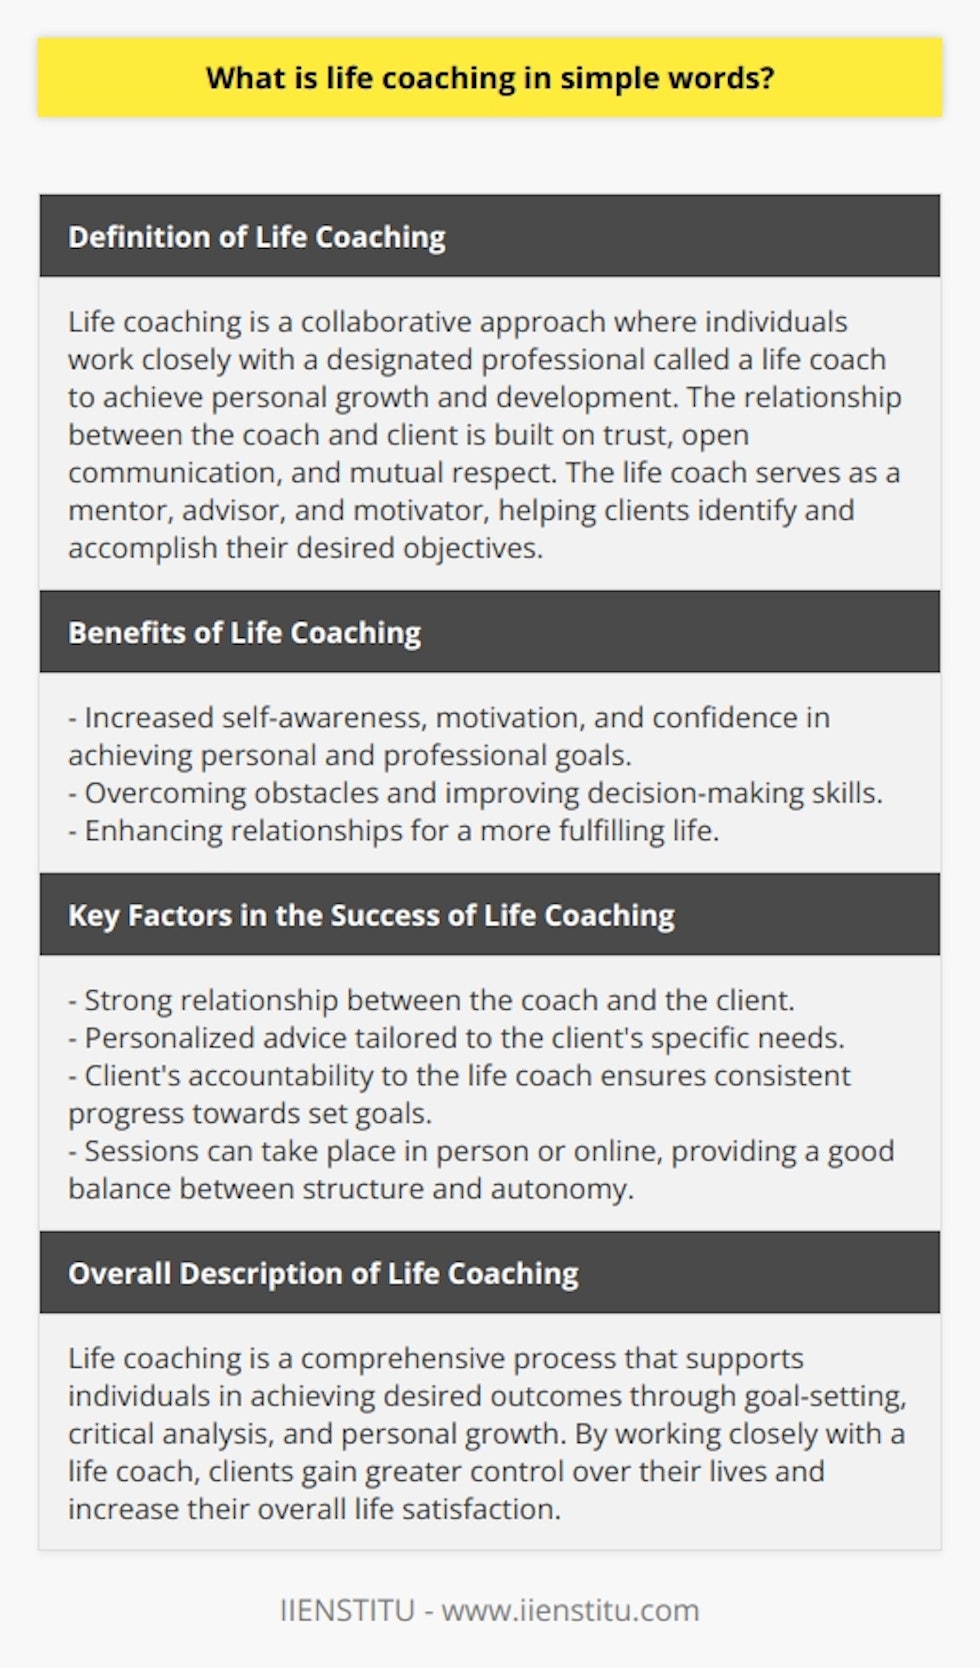 Life coaching is a collaborative approach where individuals work closely with a designated professional called a life coach to achieve personal growth and development. The relationship between the coach and client is built on trust, open communication, and mutual respect. The life coach serves as a mentor, advisor, and motivator, helping clients identify and accomplish their desired objectives.Participating in a life coaching program offers numerous benefits. Clients often experience increased self-awareness, motivation, and confidence in their abilities to achieve personal and professional goals. Life coaching also helps individuals overcome obstacles, improve decision-making skills, and enhance relationships, leading to a more fulfilling life.The success of life coaching relies on the strong relationship between the coach and the client. This enables personalized advice tailored to the client's specific needs. Additionally, the client's accountability to the life coach ensures consistent progress towards set goals. Sessions can take place in person or online, providing a good balance between structure and autonomy.Overall, life coaching is a comprehensive process that supports individuals in achieving desired outcomes through goal-setting, critical analysis, and personal growth. By working closely with a life coach, clients gain greater control over their lives and increase their overall life satisfaction.